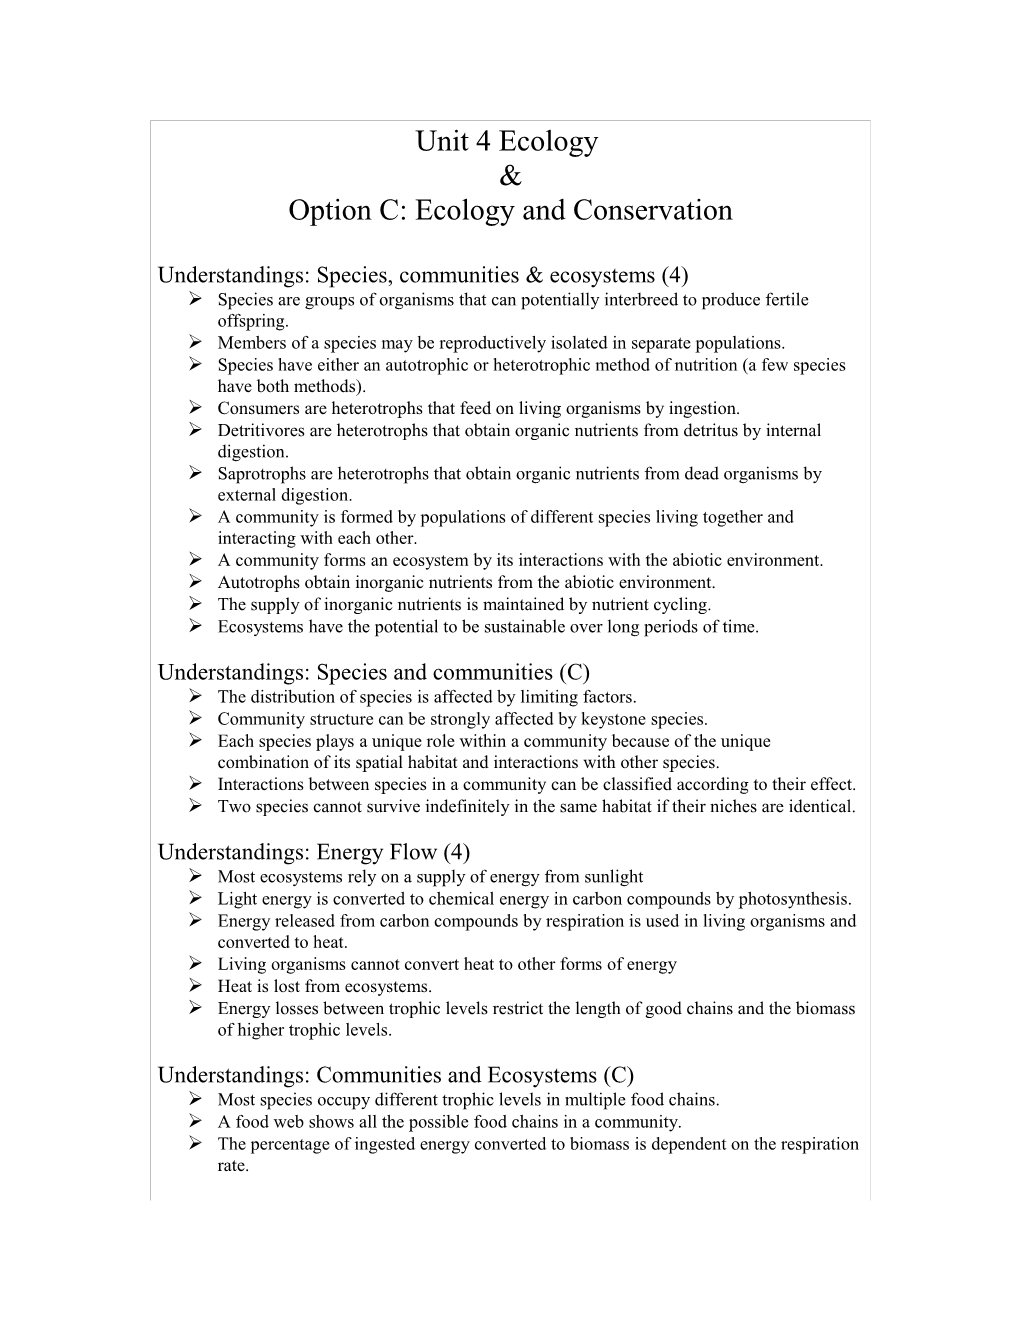 Option C: Ecology and Conservation